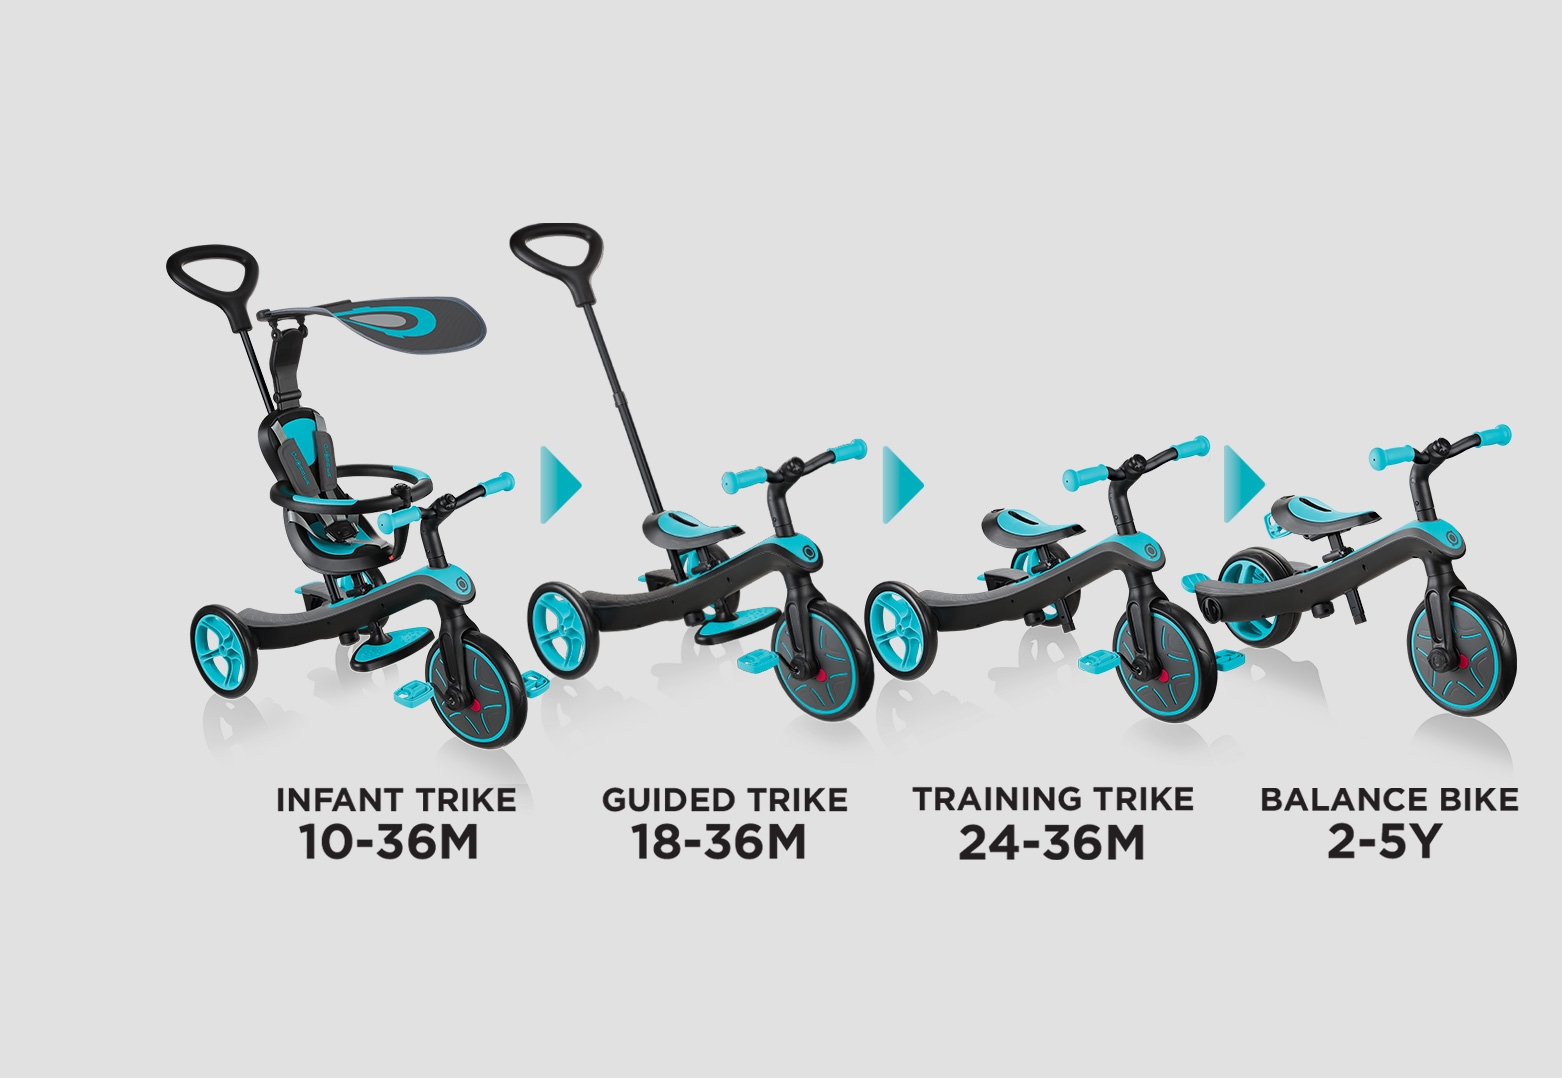 a Rotating Seat and a Shock Absorber 8 in 1 Trike Baby Walker Bike with Wheels Filled with Foam Profiseller Chiccot Kids Tricycle